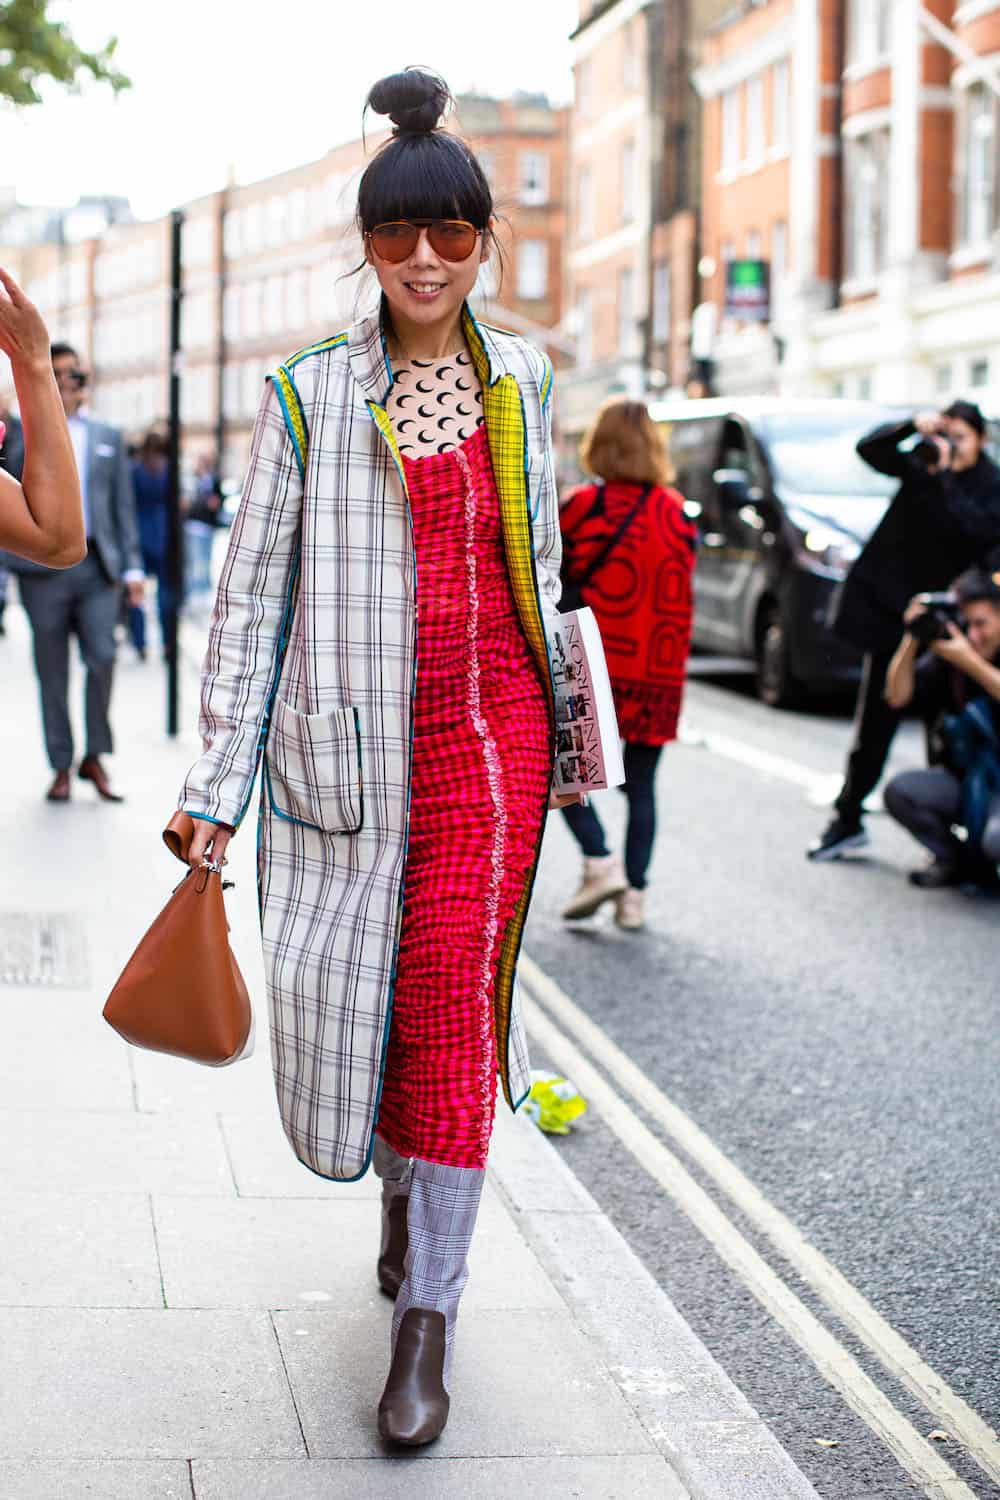 All the Best Street Style Pics from London Fashion Week